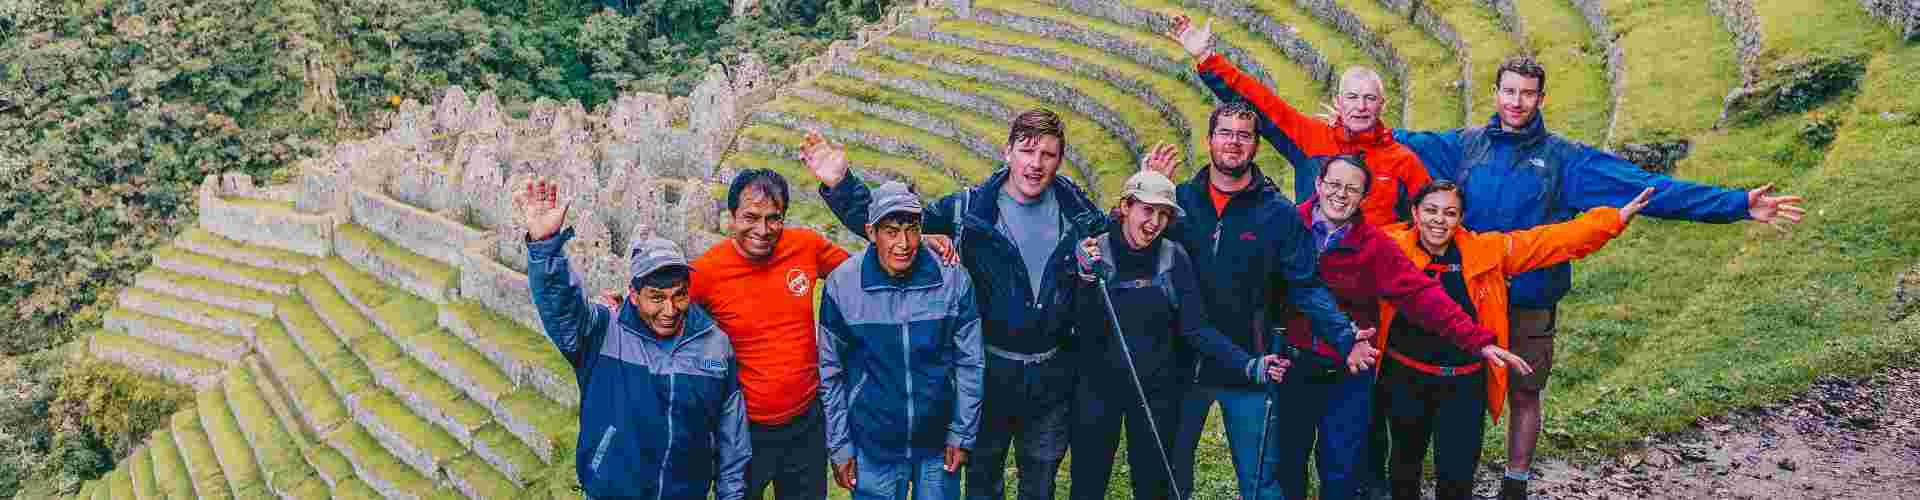 A group of hikers posing for a photo on the Inca Trail in Peru